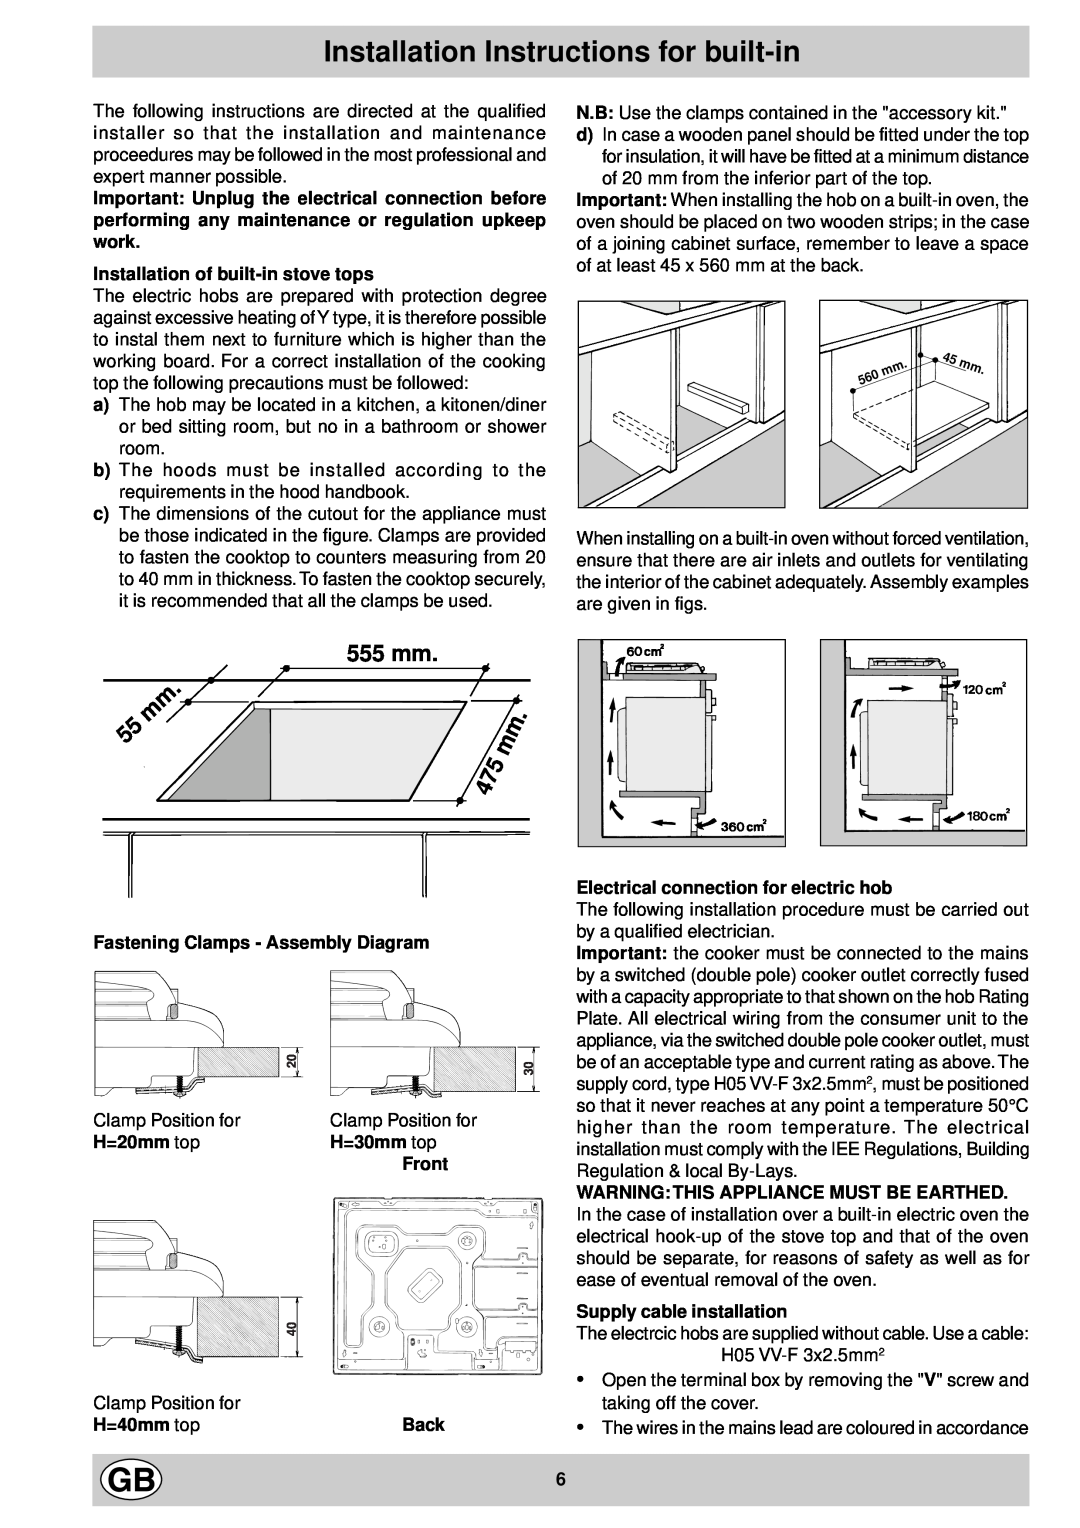 Indesit P 604 GB Installation Instructions for built-in, Installation of built-in stove tops, H=20mm top, H=30mm top, Back 